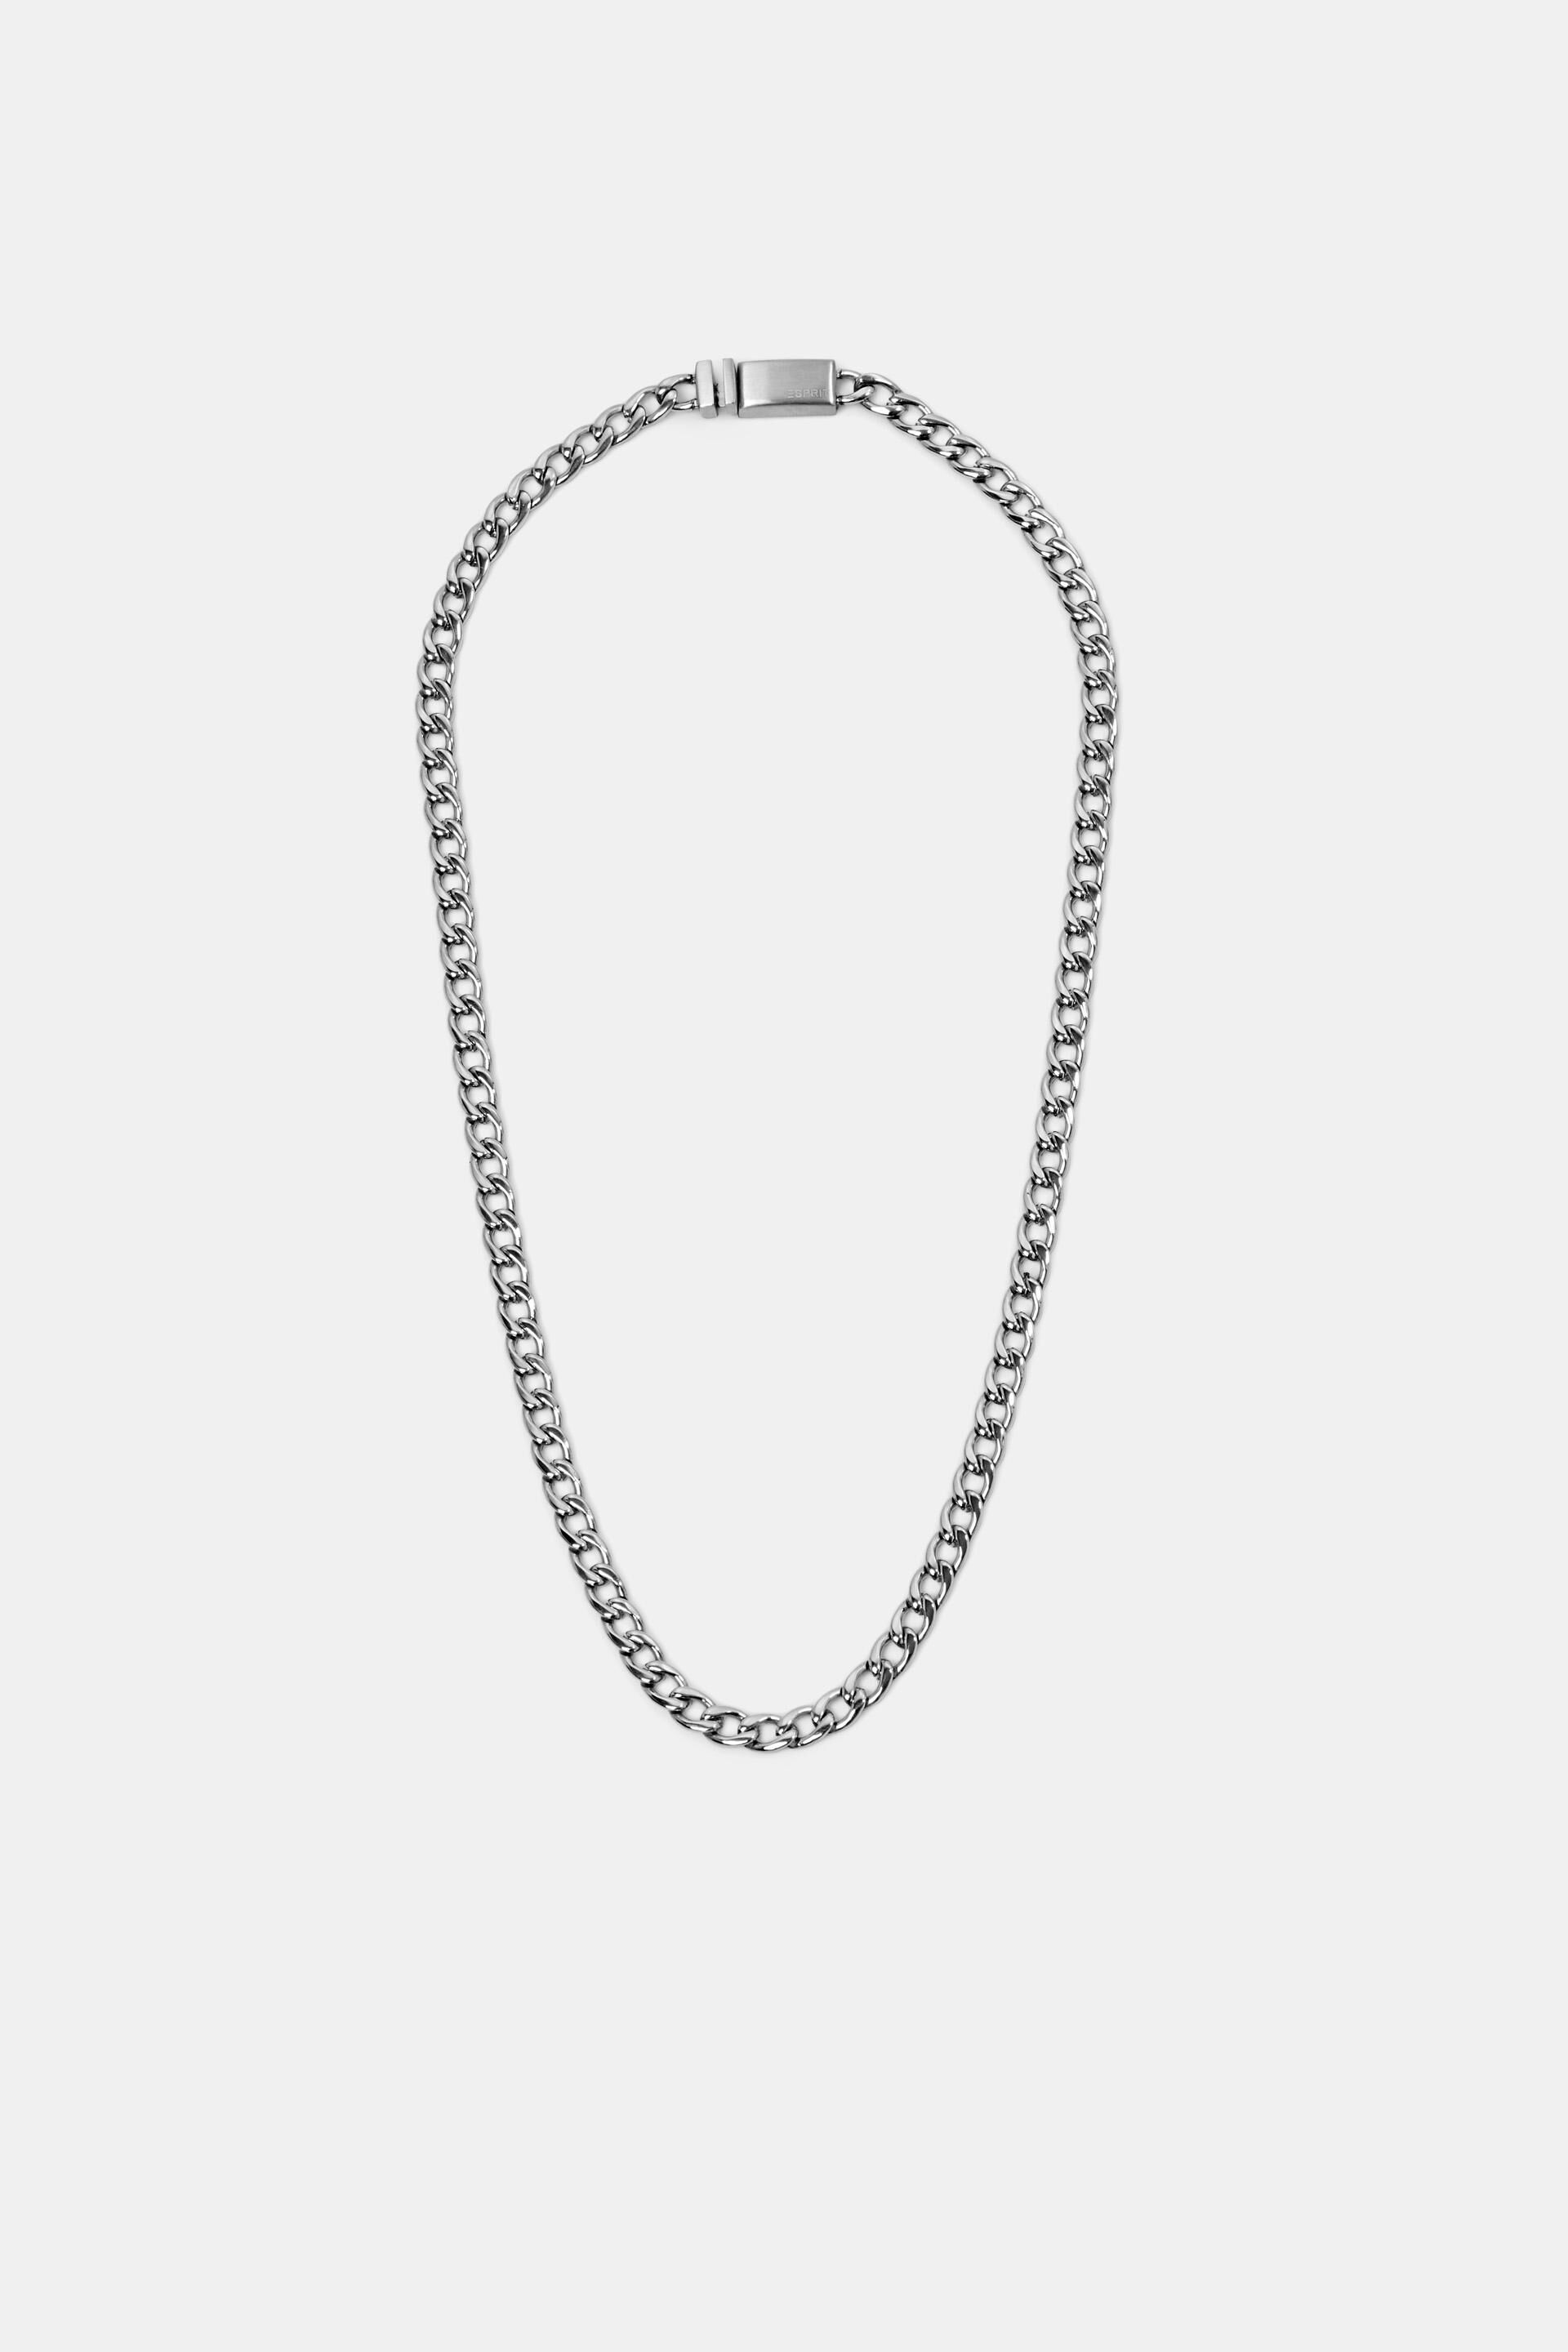 Esprit mid chunky Chain necklace piece with